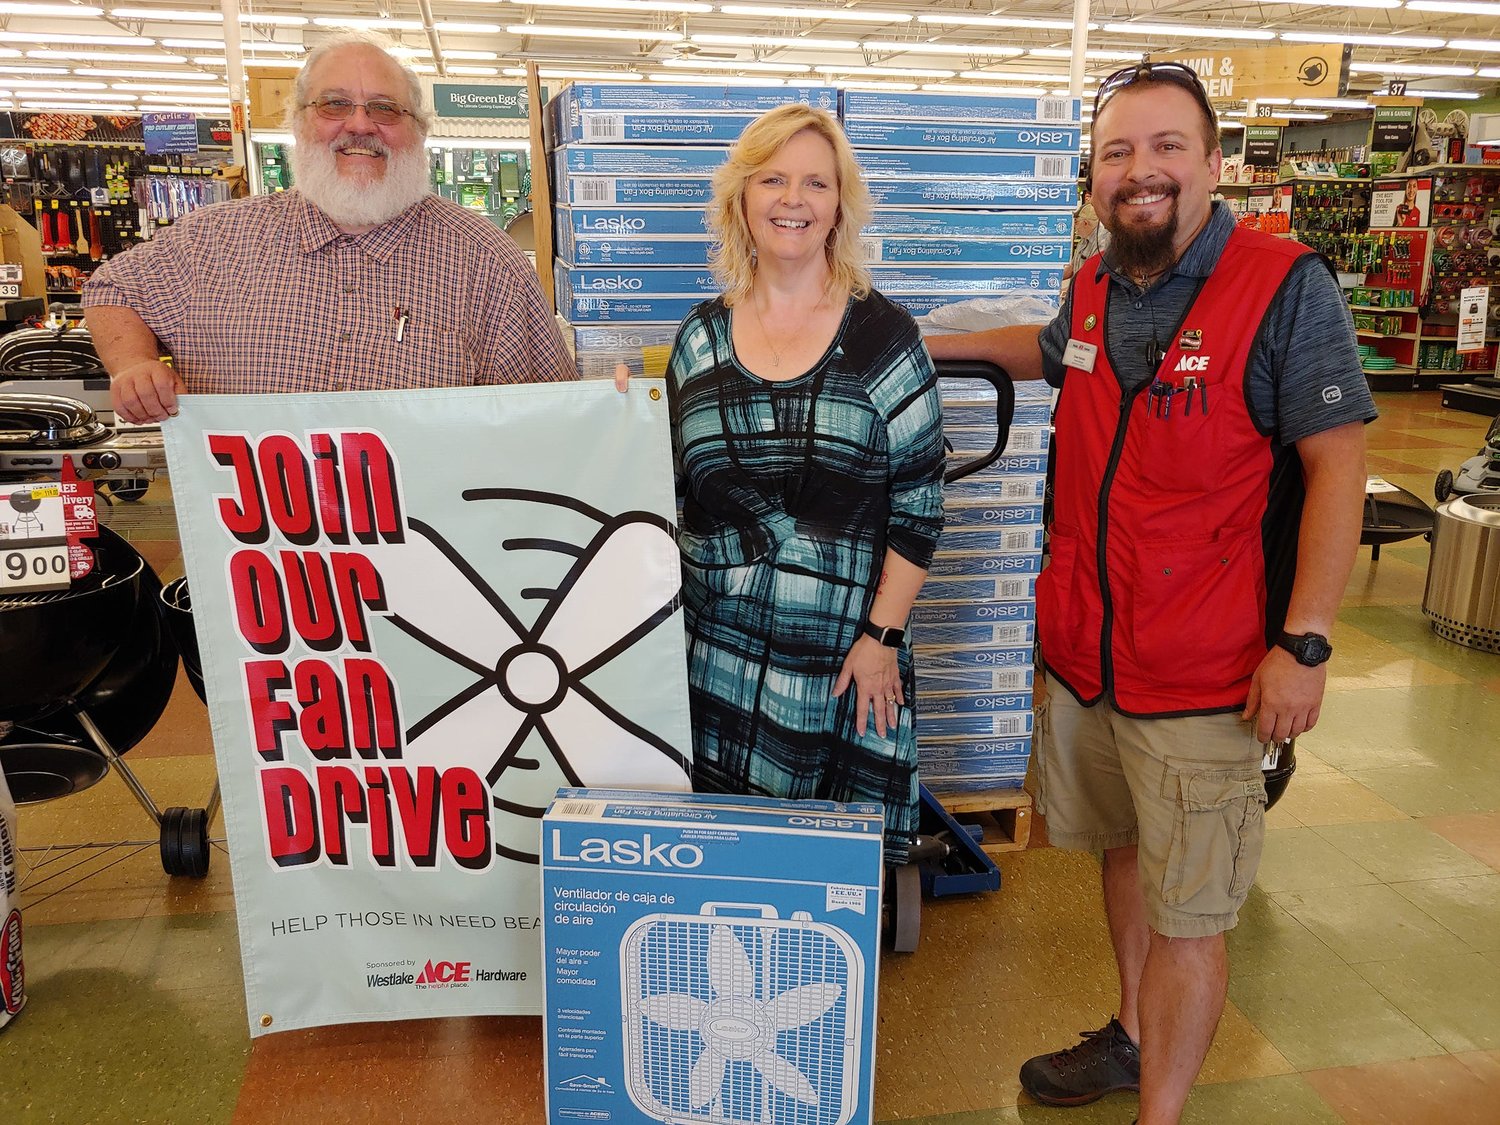 On behalf of the Salvation Army Service Unit in Moberly, Roy Morales-Kuhn, right, and Paula Heath, middle, are shown with Westlakes Ace Hardware store general manager Drew Holmes in accepting 57 electric floor fans from the Moberly business on July 13 as part of the company's nationwide Fan Drive. The floor fans will be distributed by the Salvation Army to persons in need to help give them comfort during excessive heat. Nearly $875 in customer donations at the Moberly store benefited the program. To learn more about the local Salvation Army Service Unit, contact Morales-Kuhn by calling 263-0094.